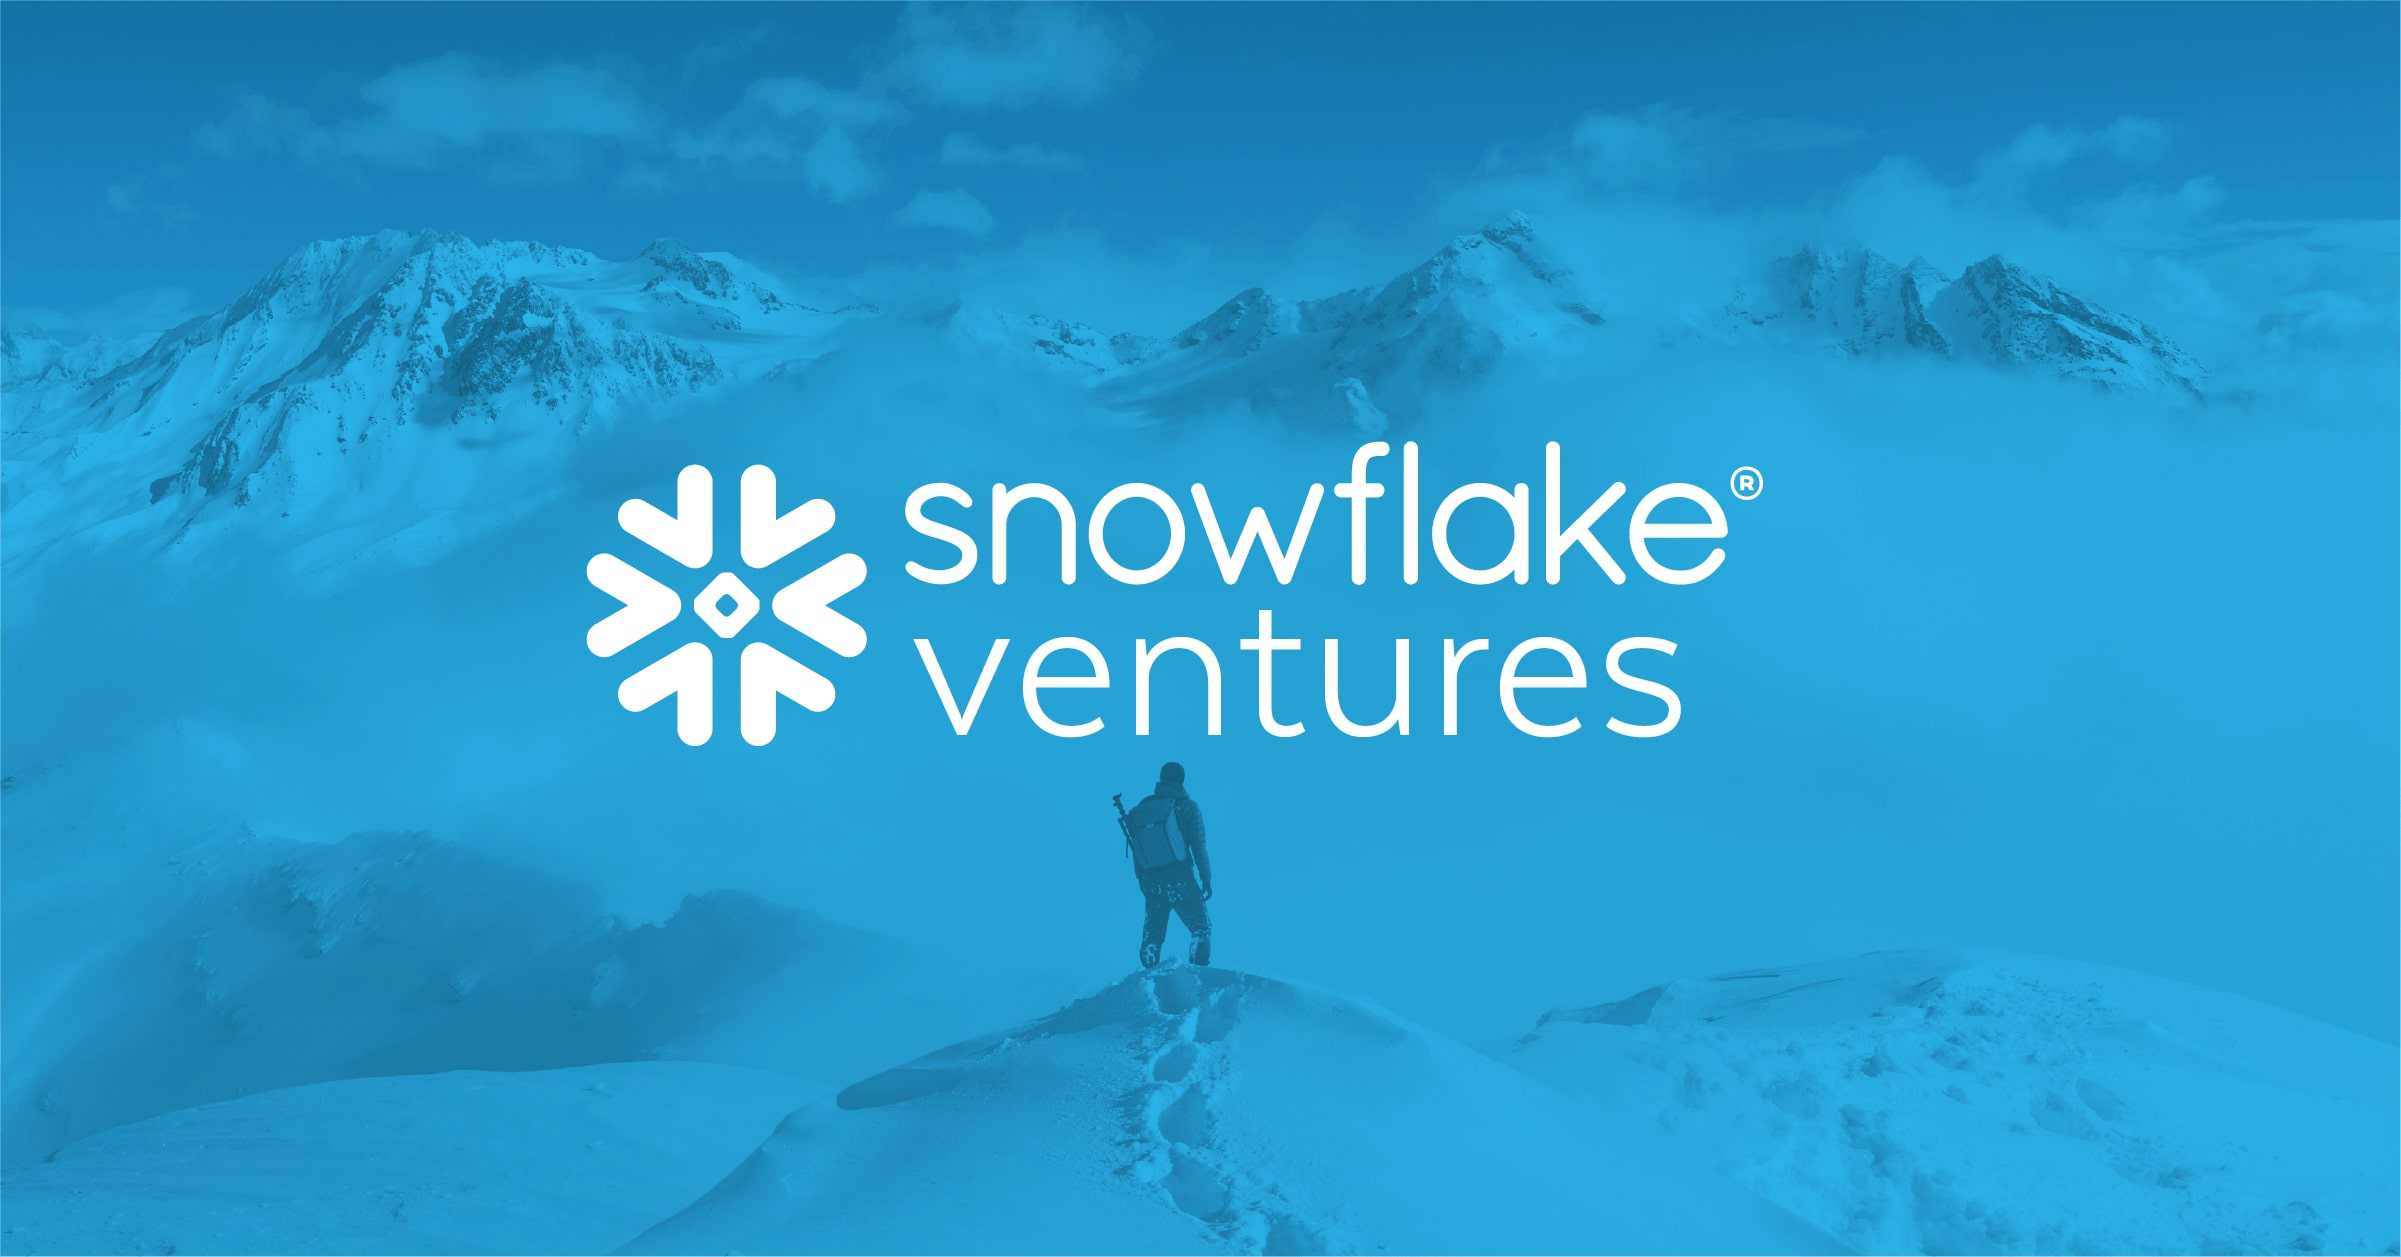 Snowflake Invests In dbt Labs, Cementing Our Partnership And Paving The Way For More Innovation Ahead